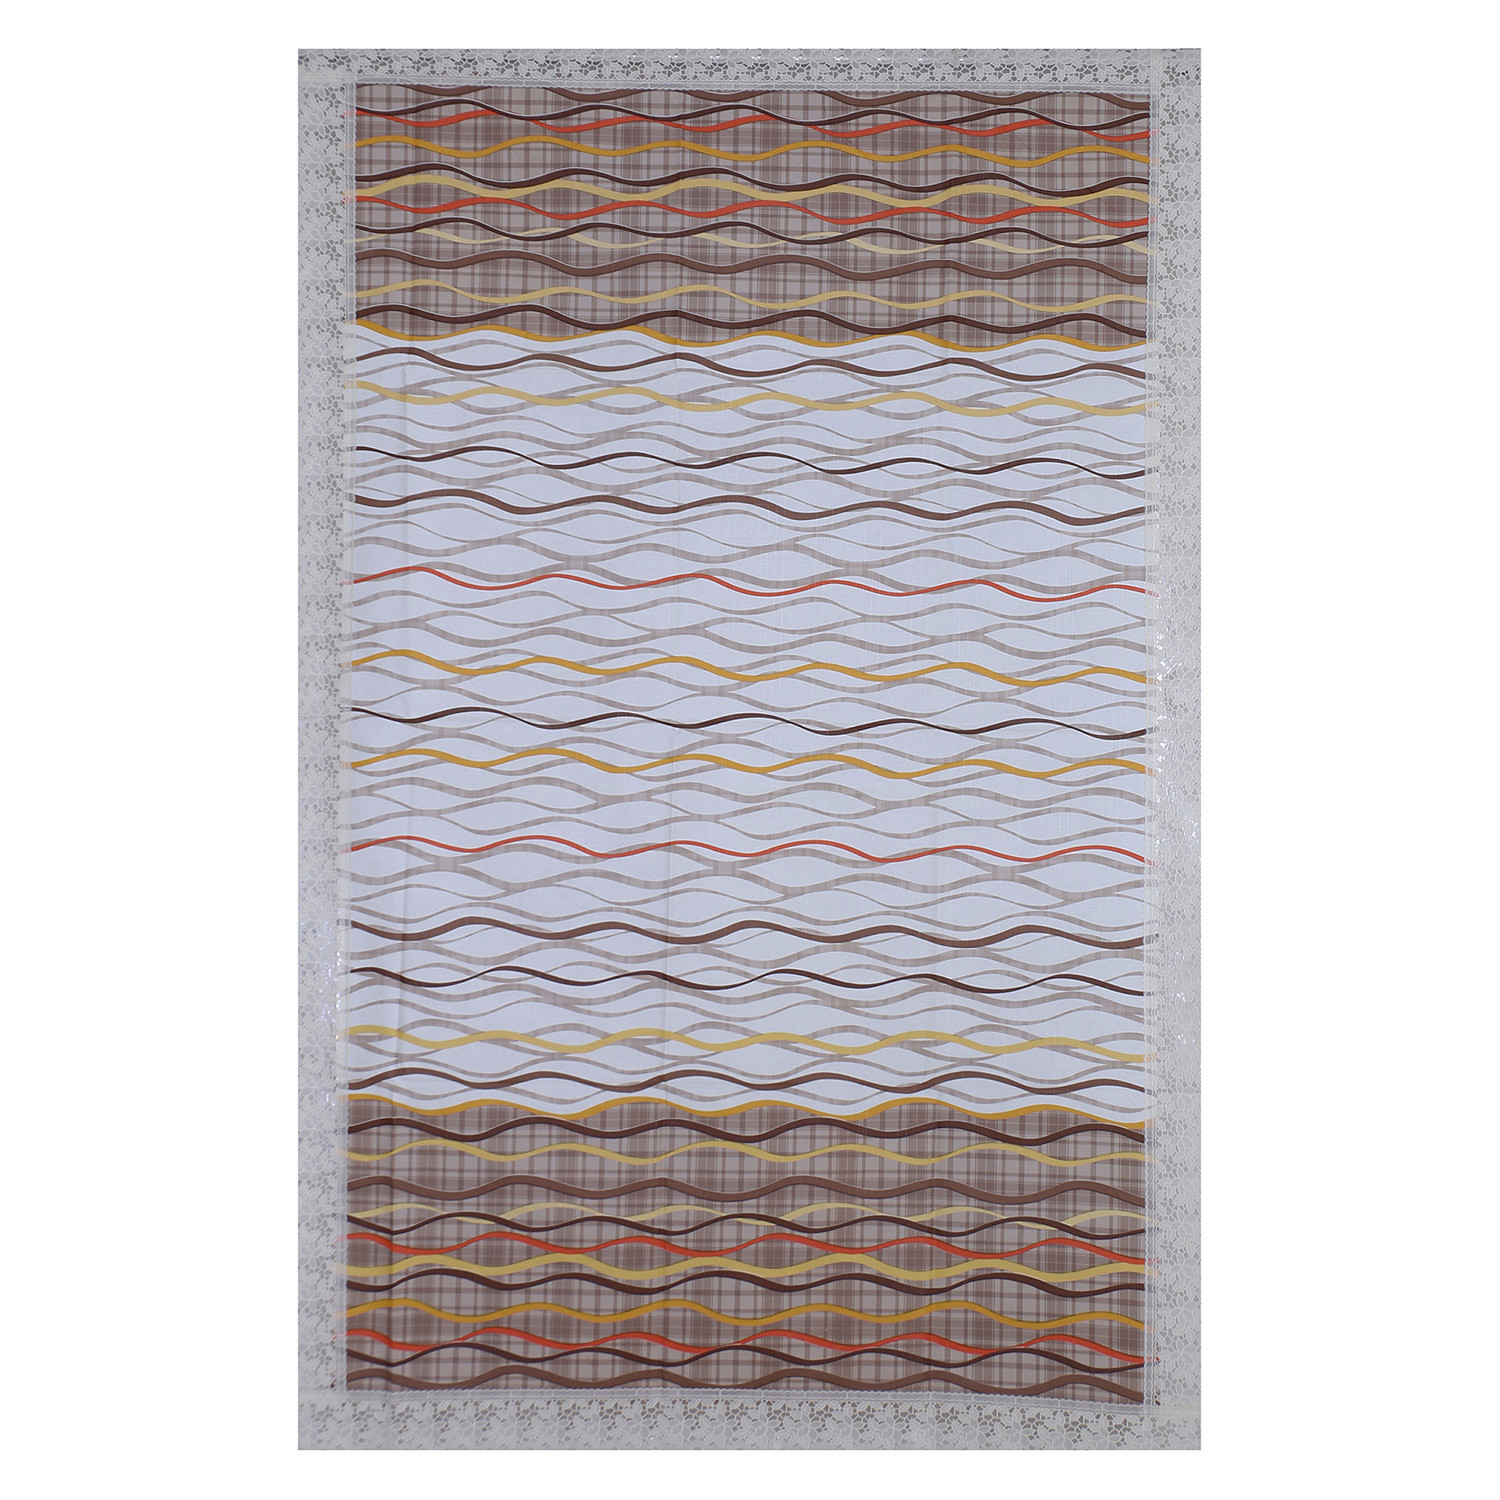 Kuber Industries Center Table Cover|Luxurious Line Pattern PVC Tablecloth|Slip Resistant Protector Table Top Cover With Seamlace Border, 40x60 Inch (Multicolor)